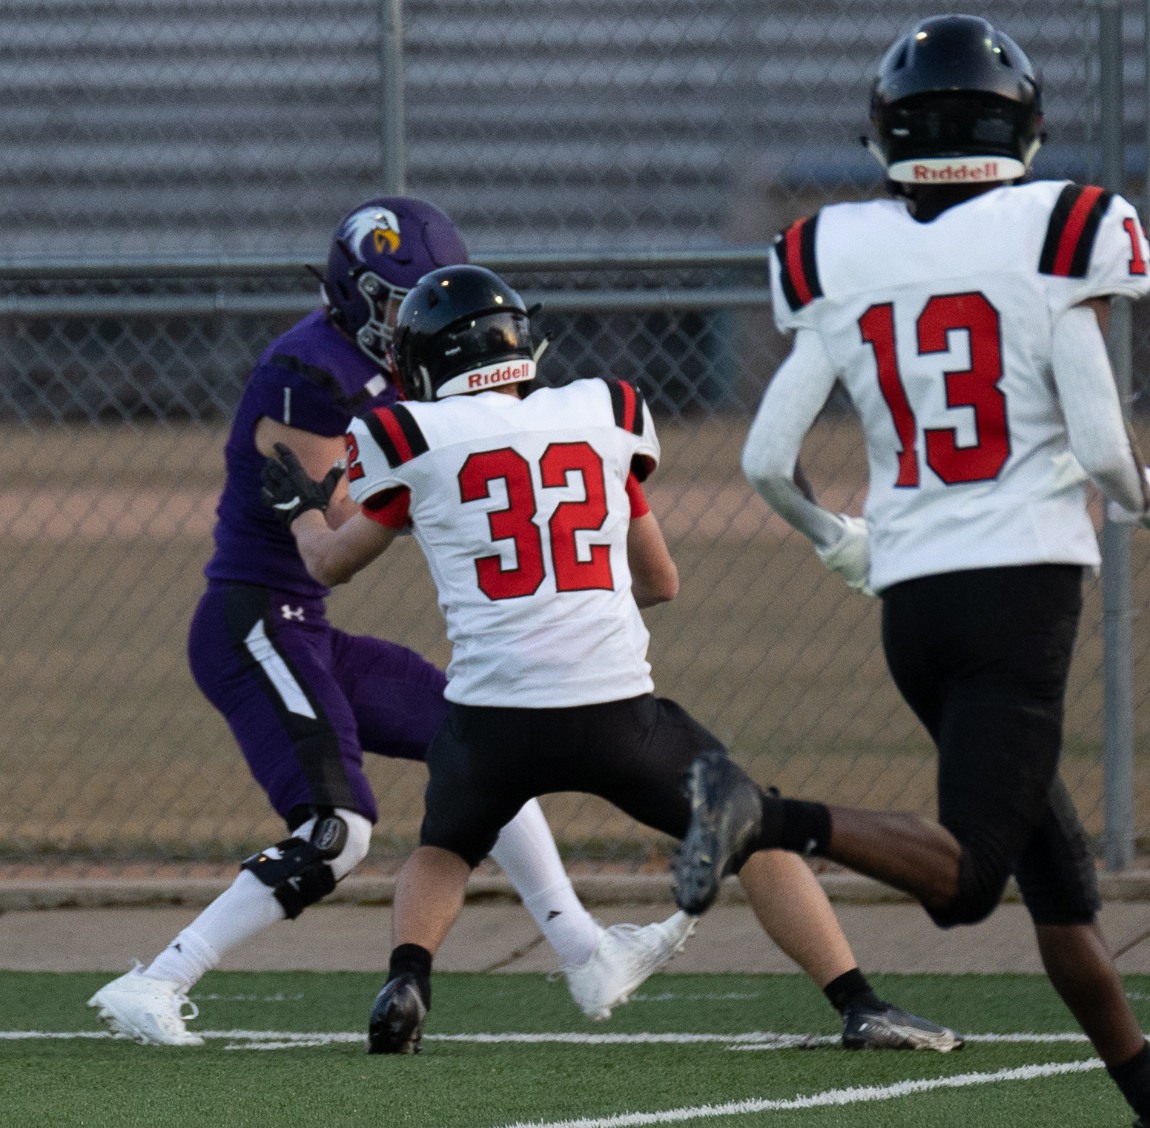 Eau-Claire-Memorial-JV-Football-LaCrosse-Central-at-Home-3-29-21-1640